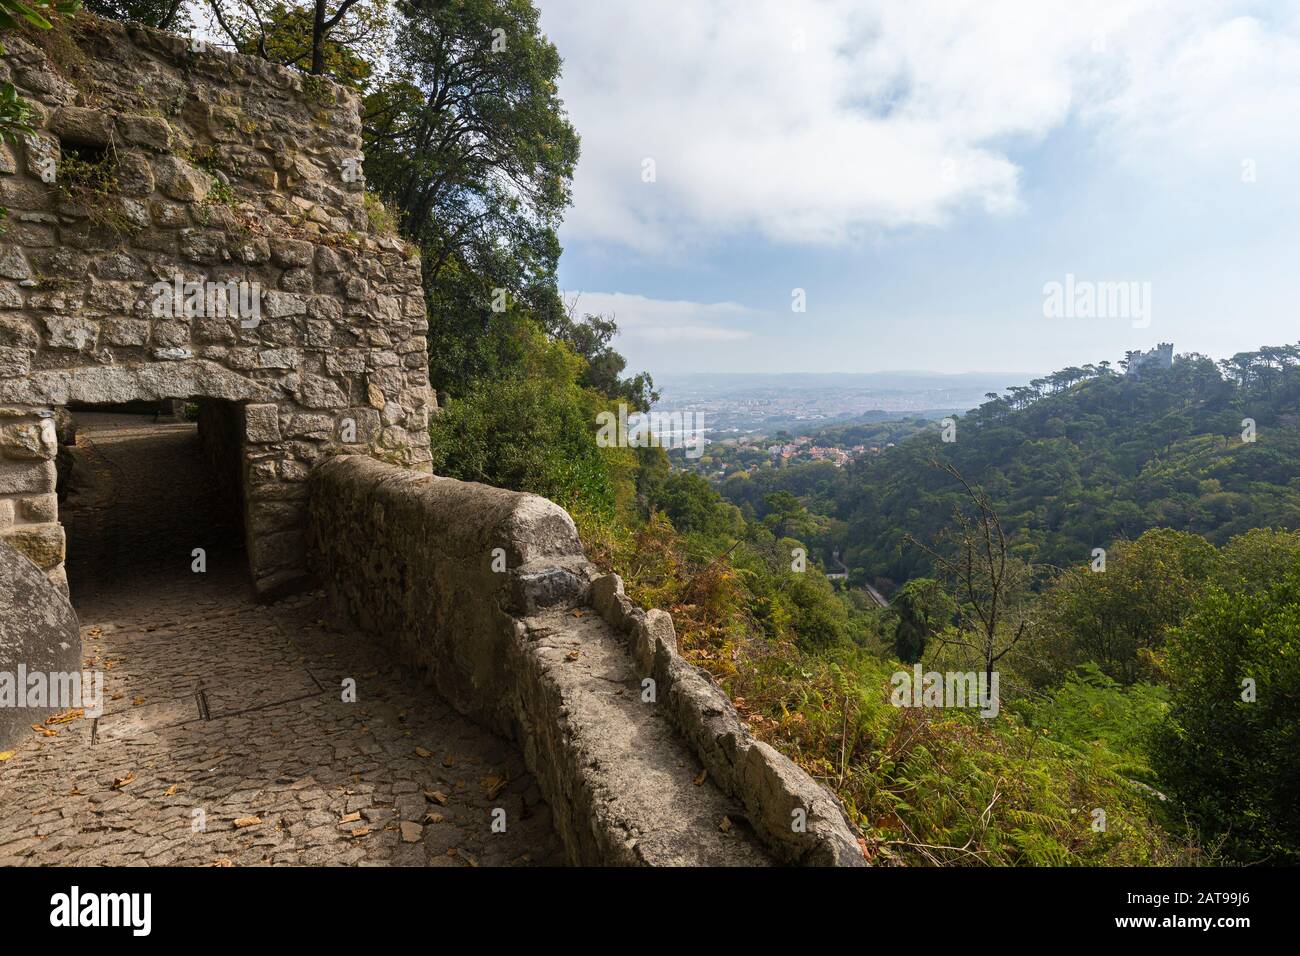 Part of the surrounding wall and footpath to medieval hilltop castle Castelo dos Mouros (The Castle of the Moors) in Sintra, Portugal. Stock Photo